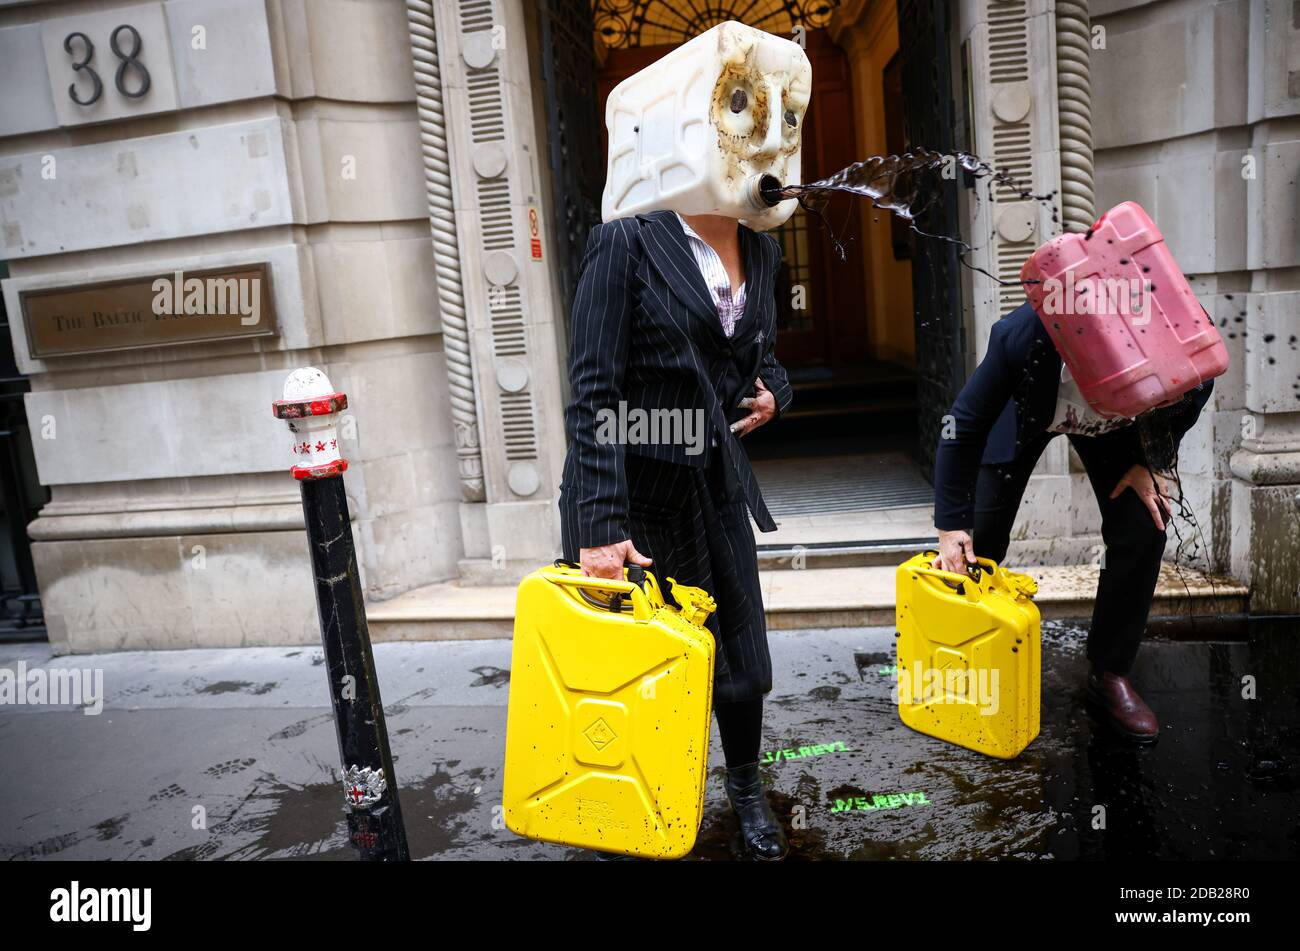 Activists from the climate action group Ocean Rebellion perform a stunt outside The Baltic Exchange building, in London, Britain November 16, 2020. REUTERS/Henry Nicholls Stock Photo